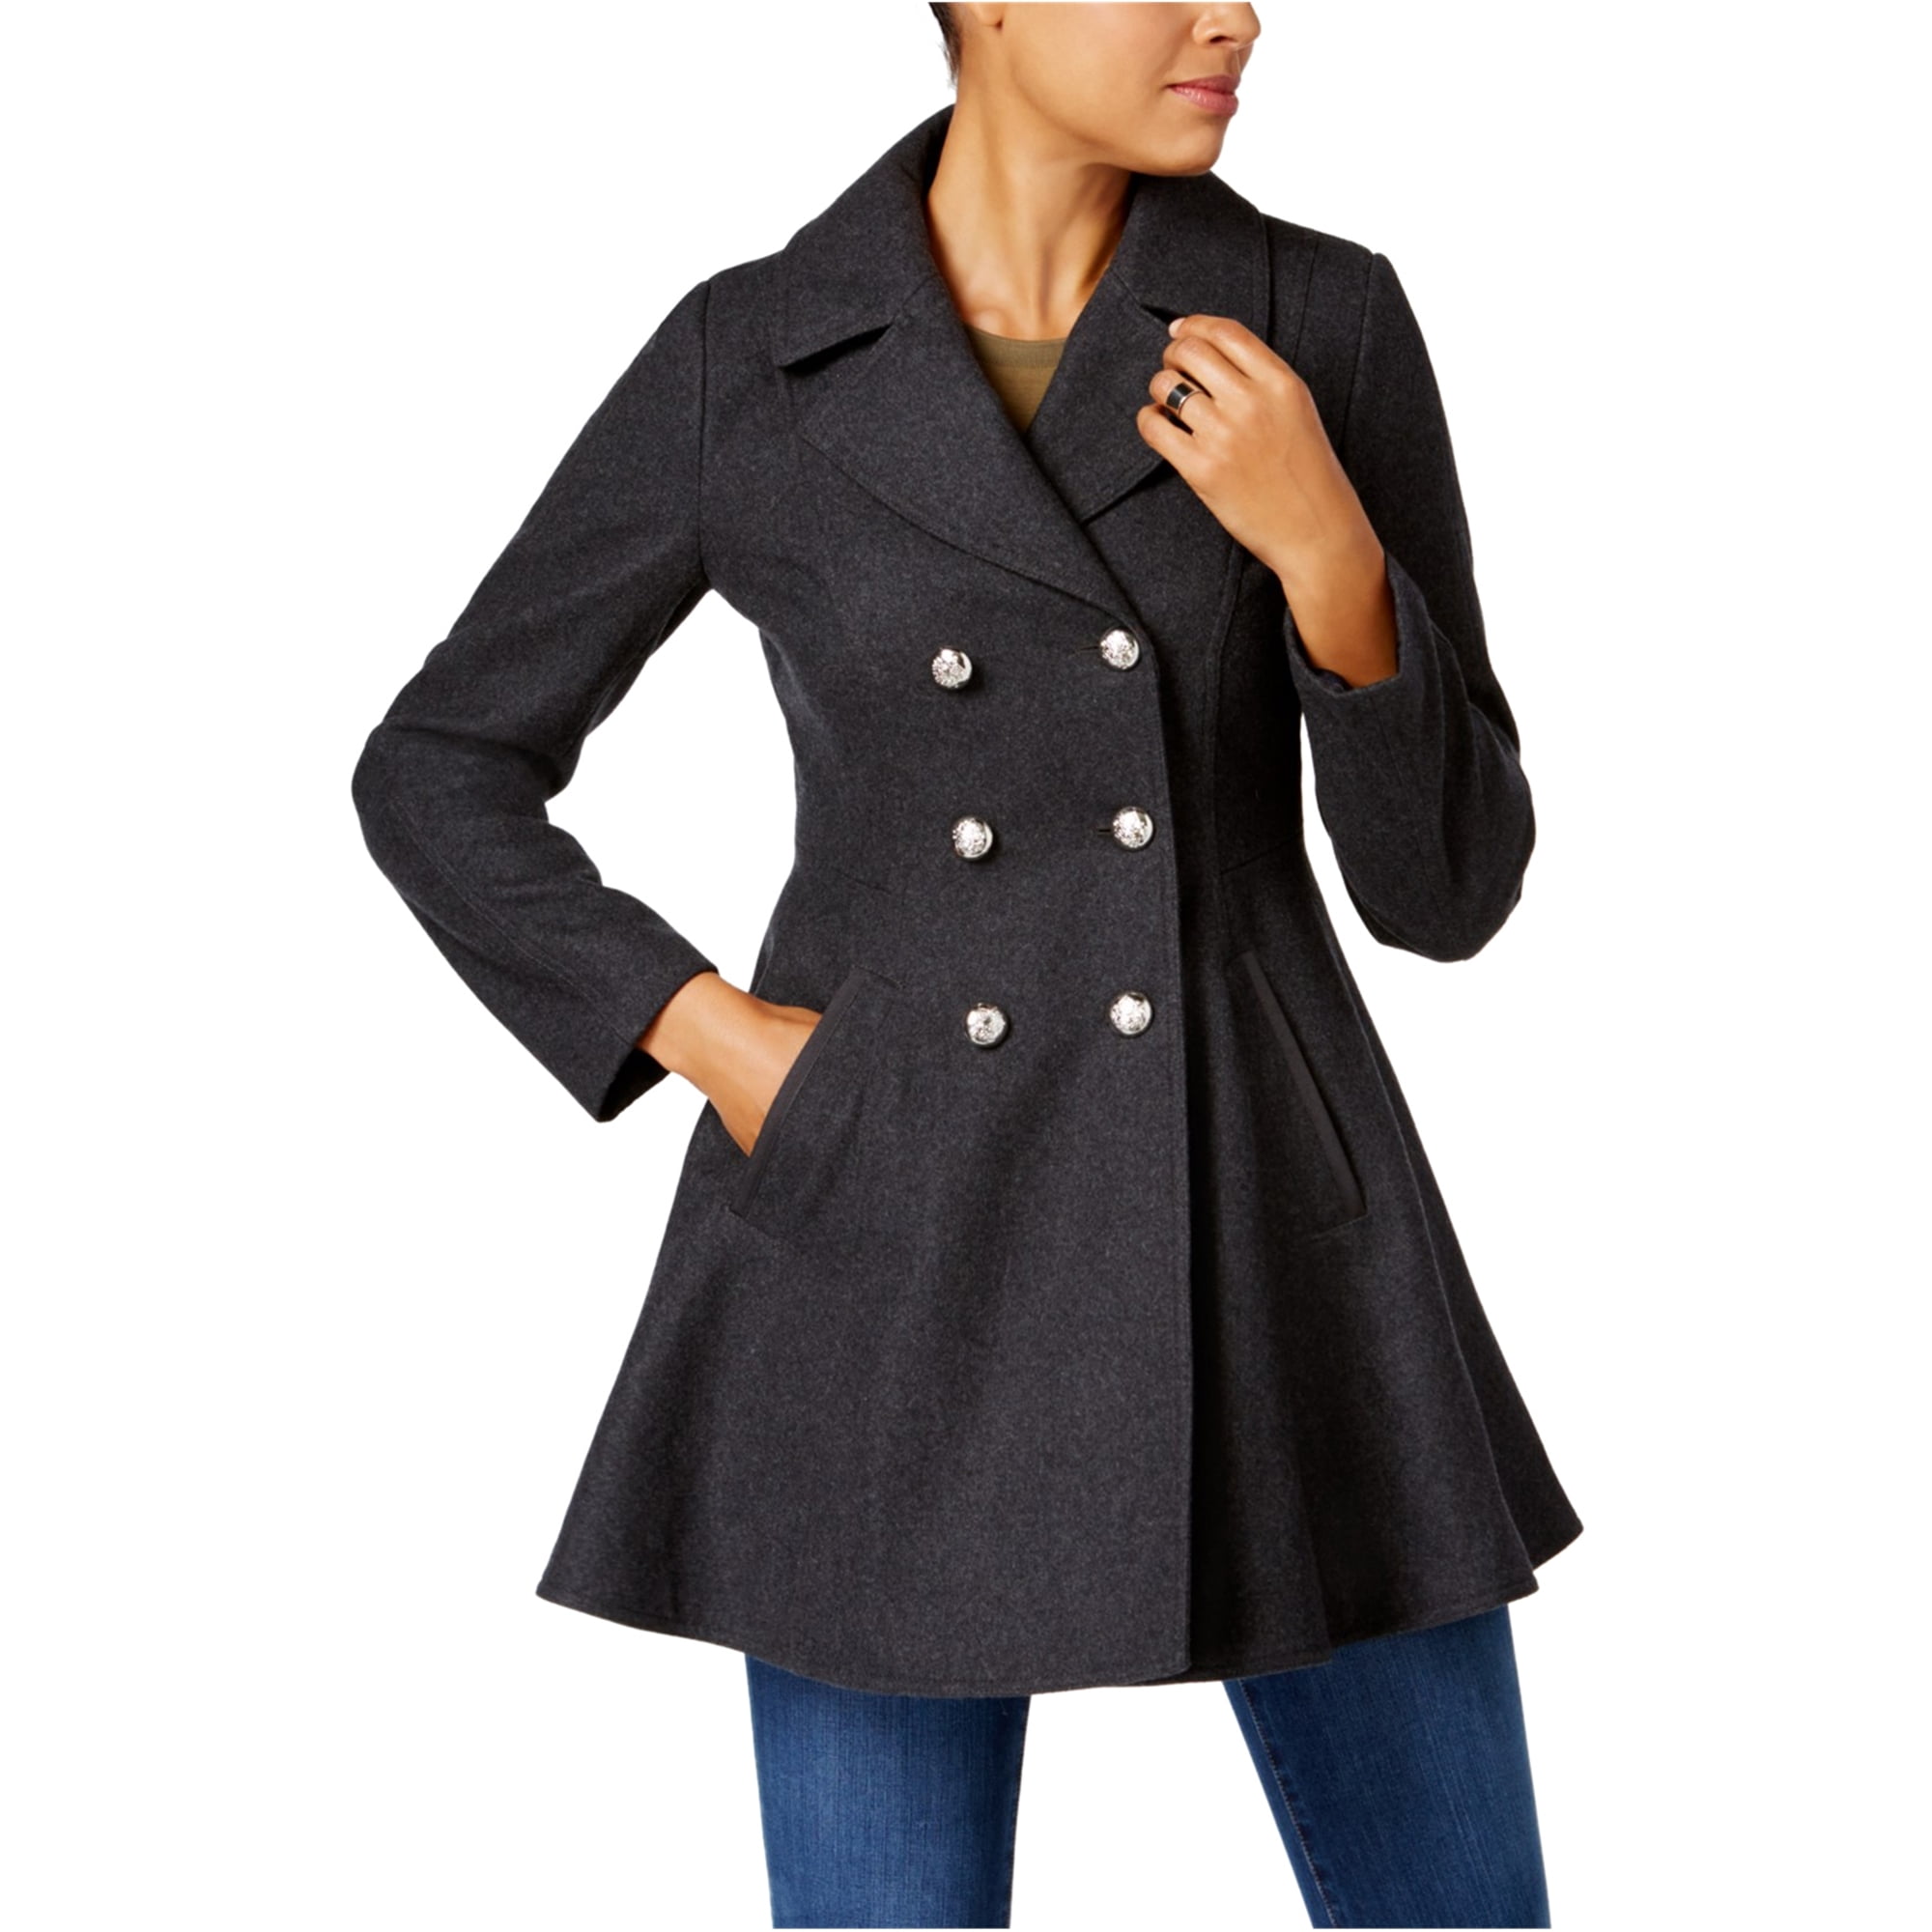 Laundry Womens Double-Breasted Pea Coat, Grey, X-Small